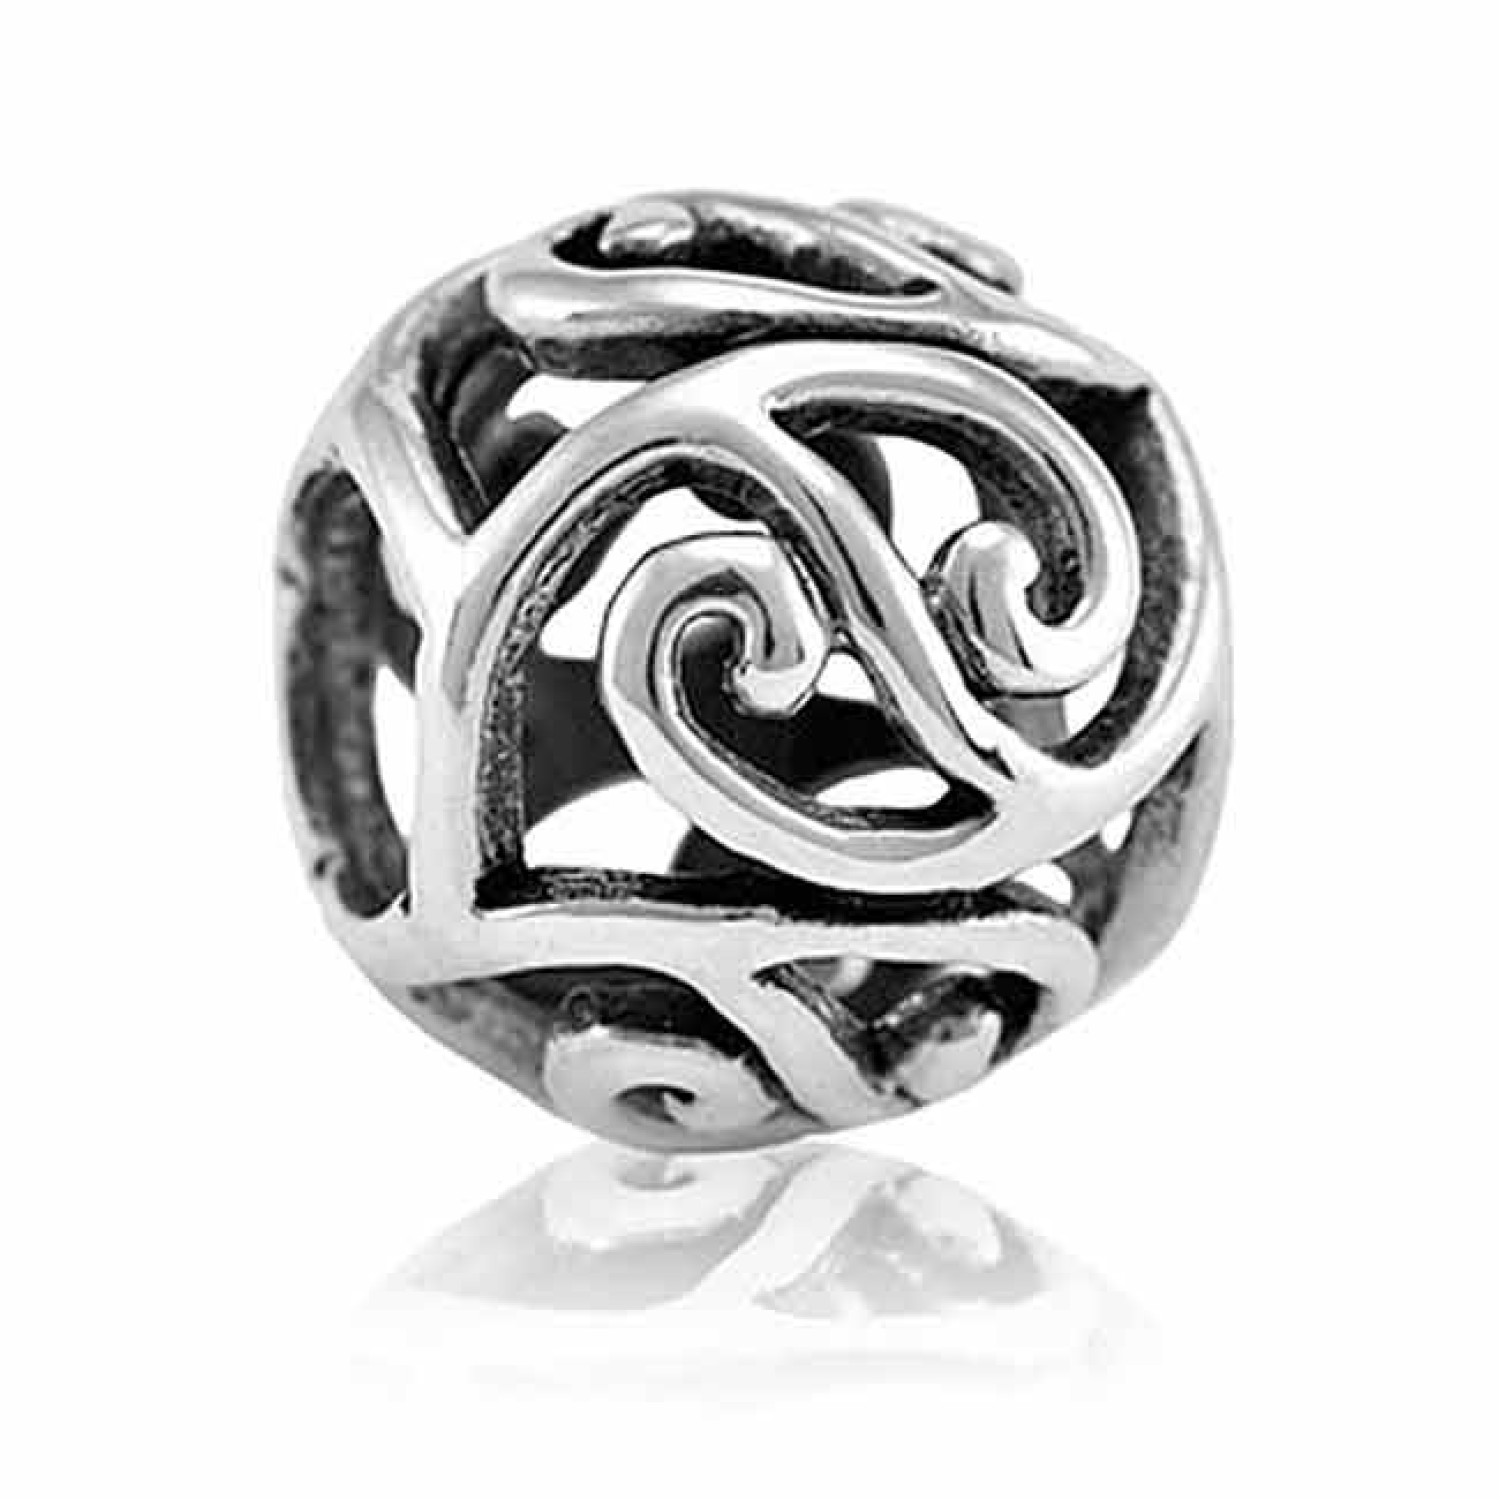 LK166 Evolve  Charm Friendship. LK166 Evolve 925 Sterling Silver Charm Friendship This intricate design symbolises our most cherished friendships. The koru spirals mirror one another, representing the special bond we share with our closest friends. A t @c